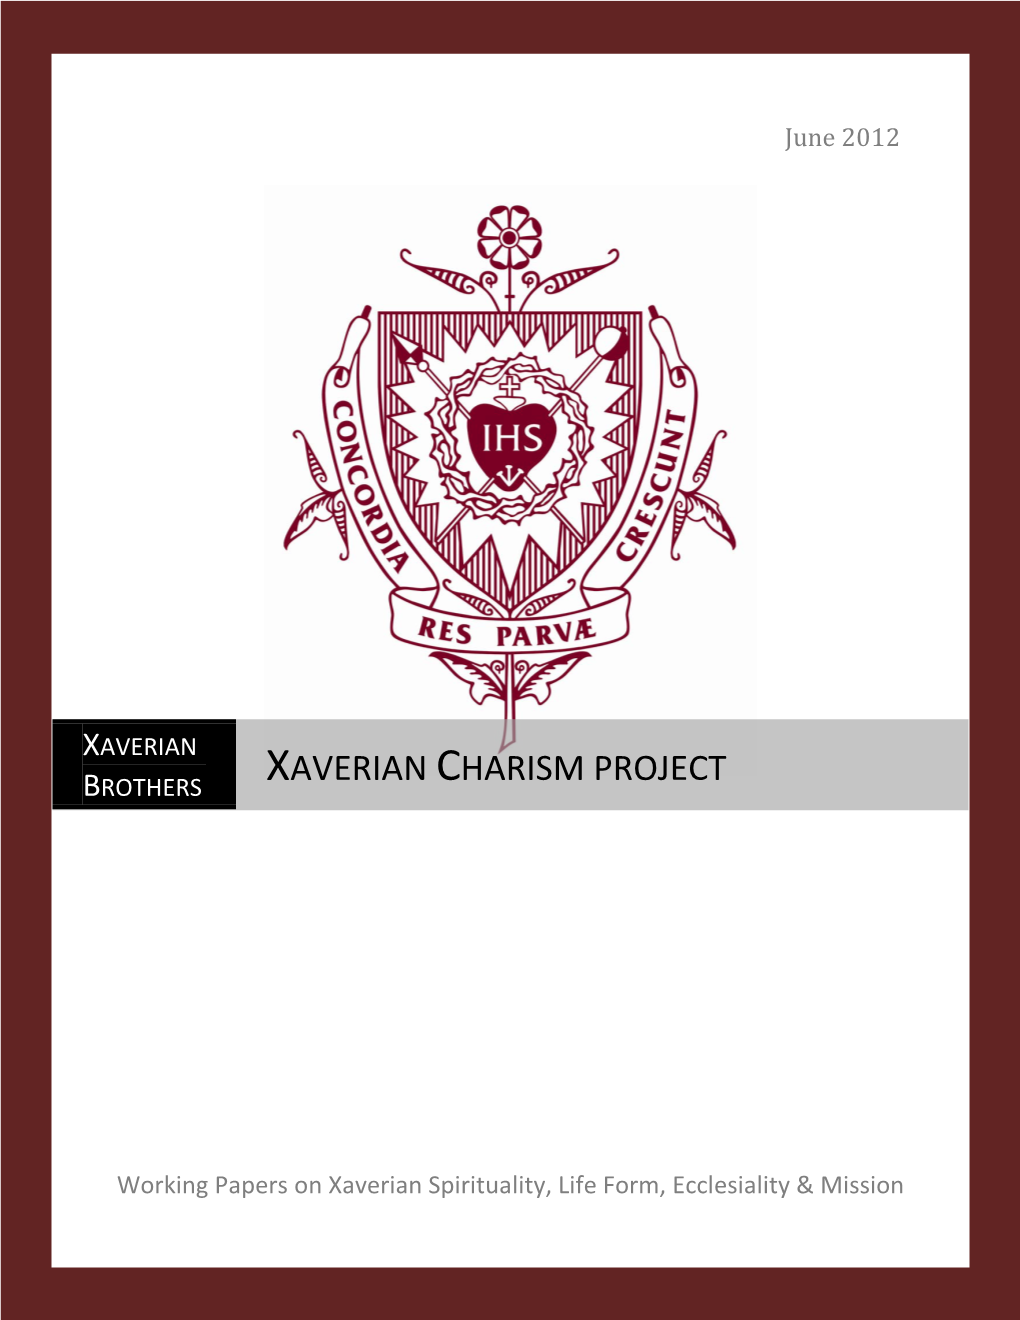 Xaverian Charism Project